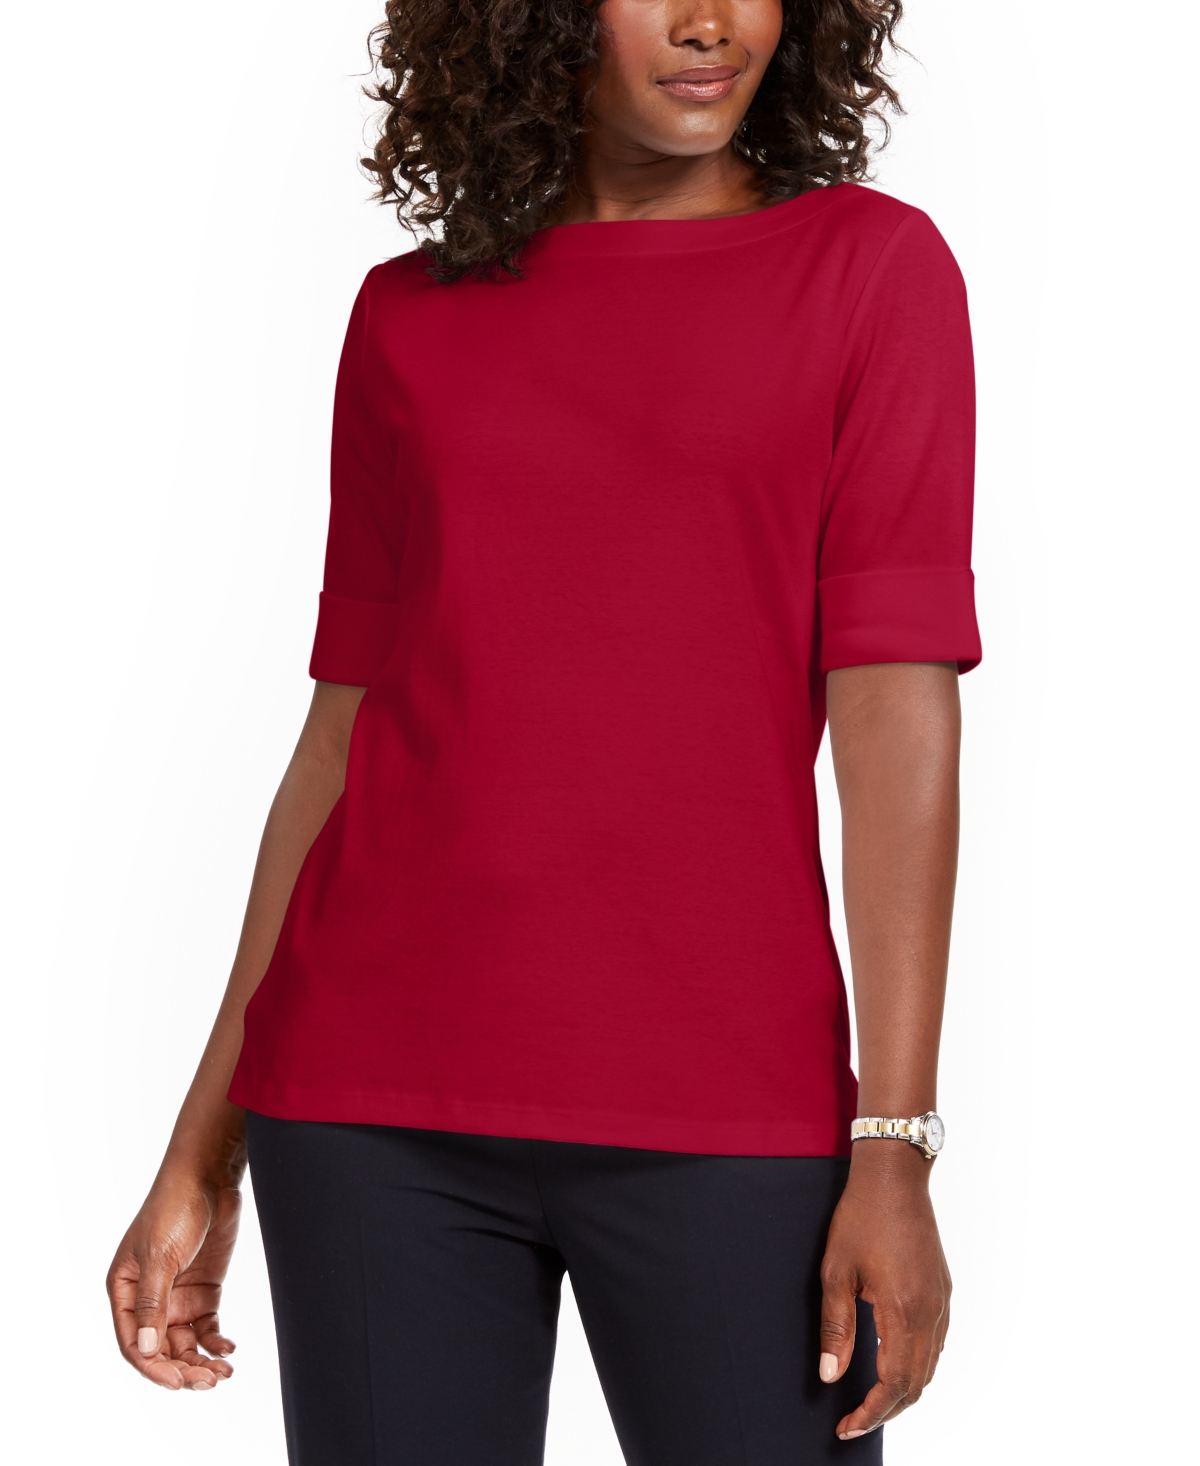 Cotton Boat-Neck Top, Created for Macy's - Steel Rose